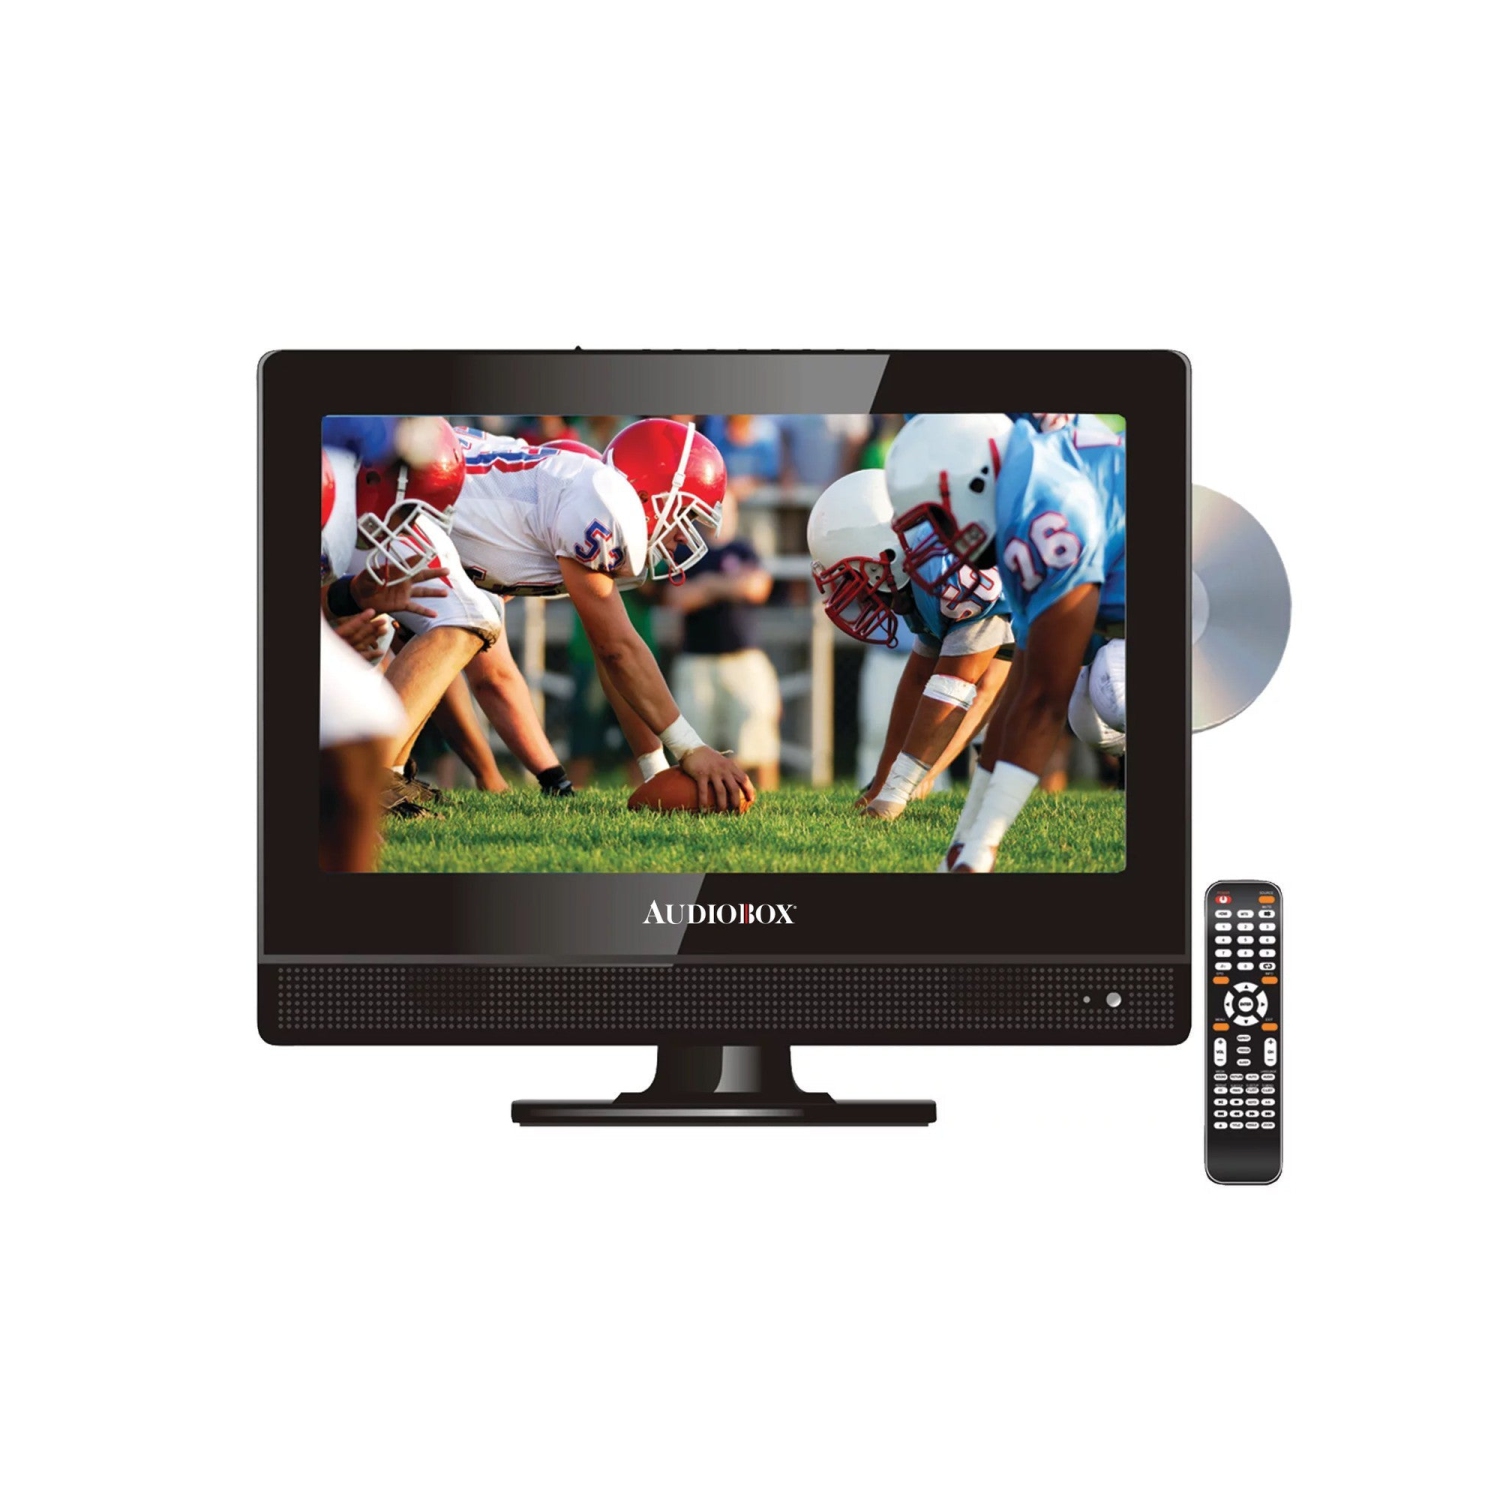 Audiobox 13" TV Widescreen HDTV, Built-in DVD Player with HDMI & USB with Car Cord Adapter and Digital Noise Reduction